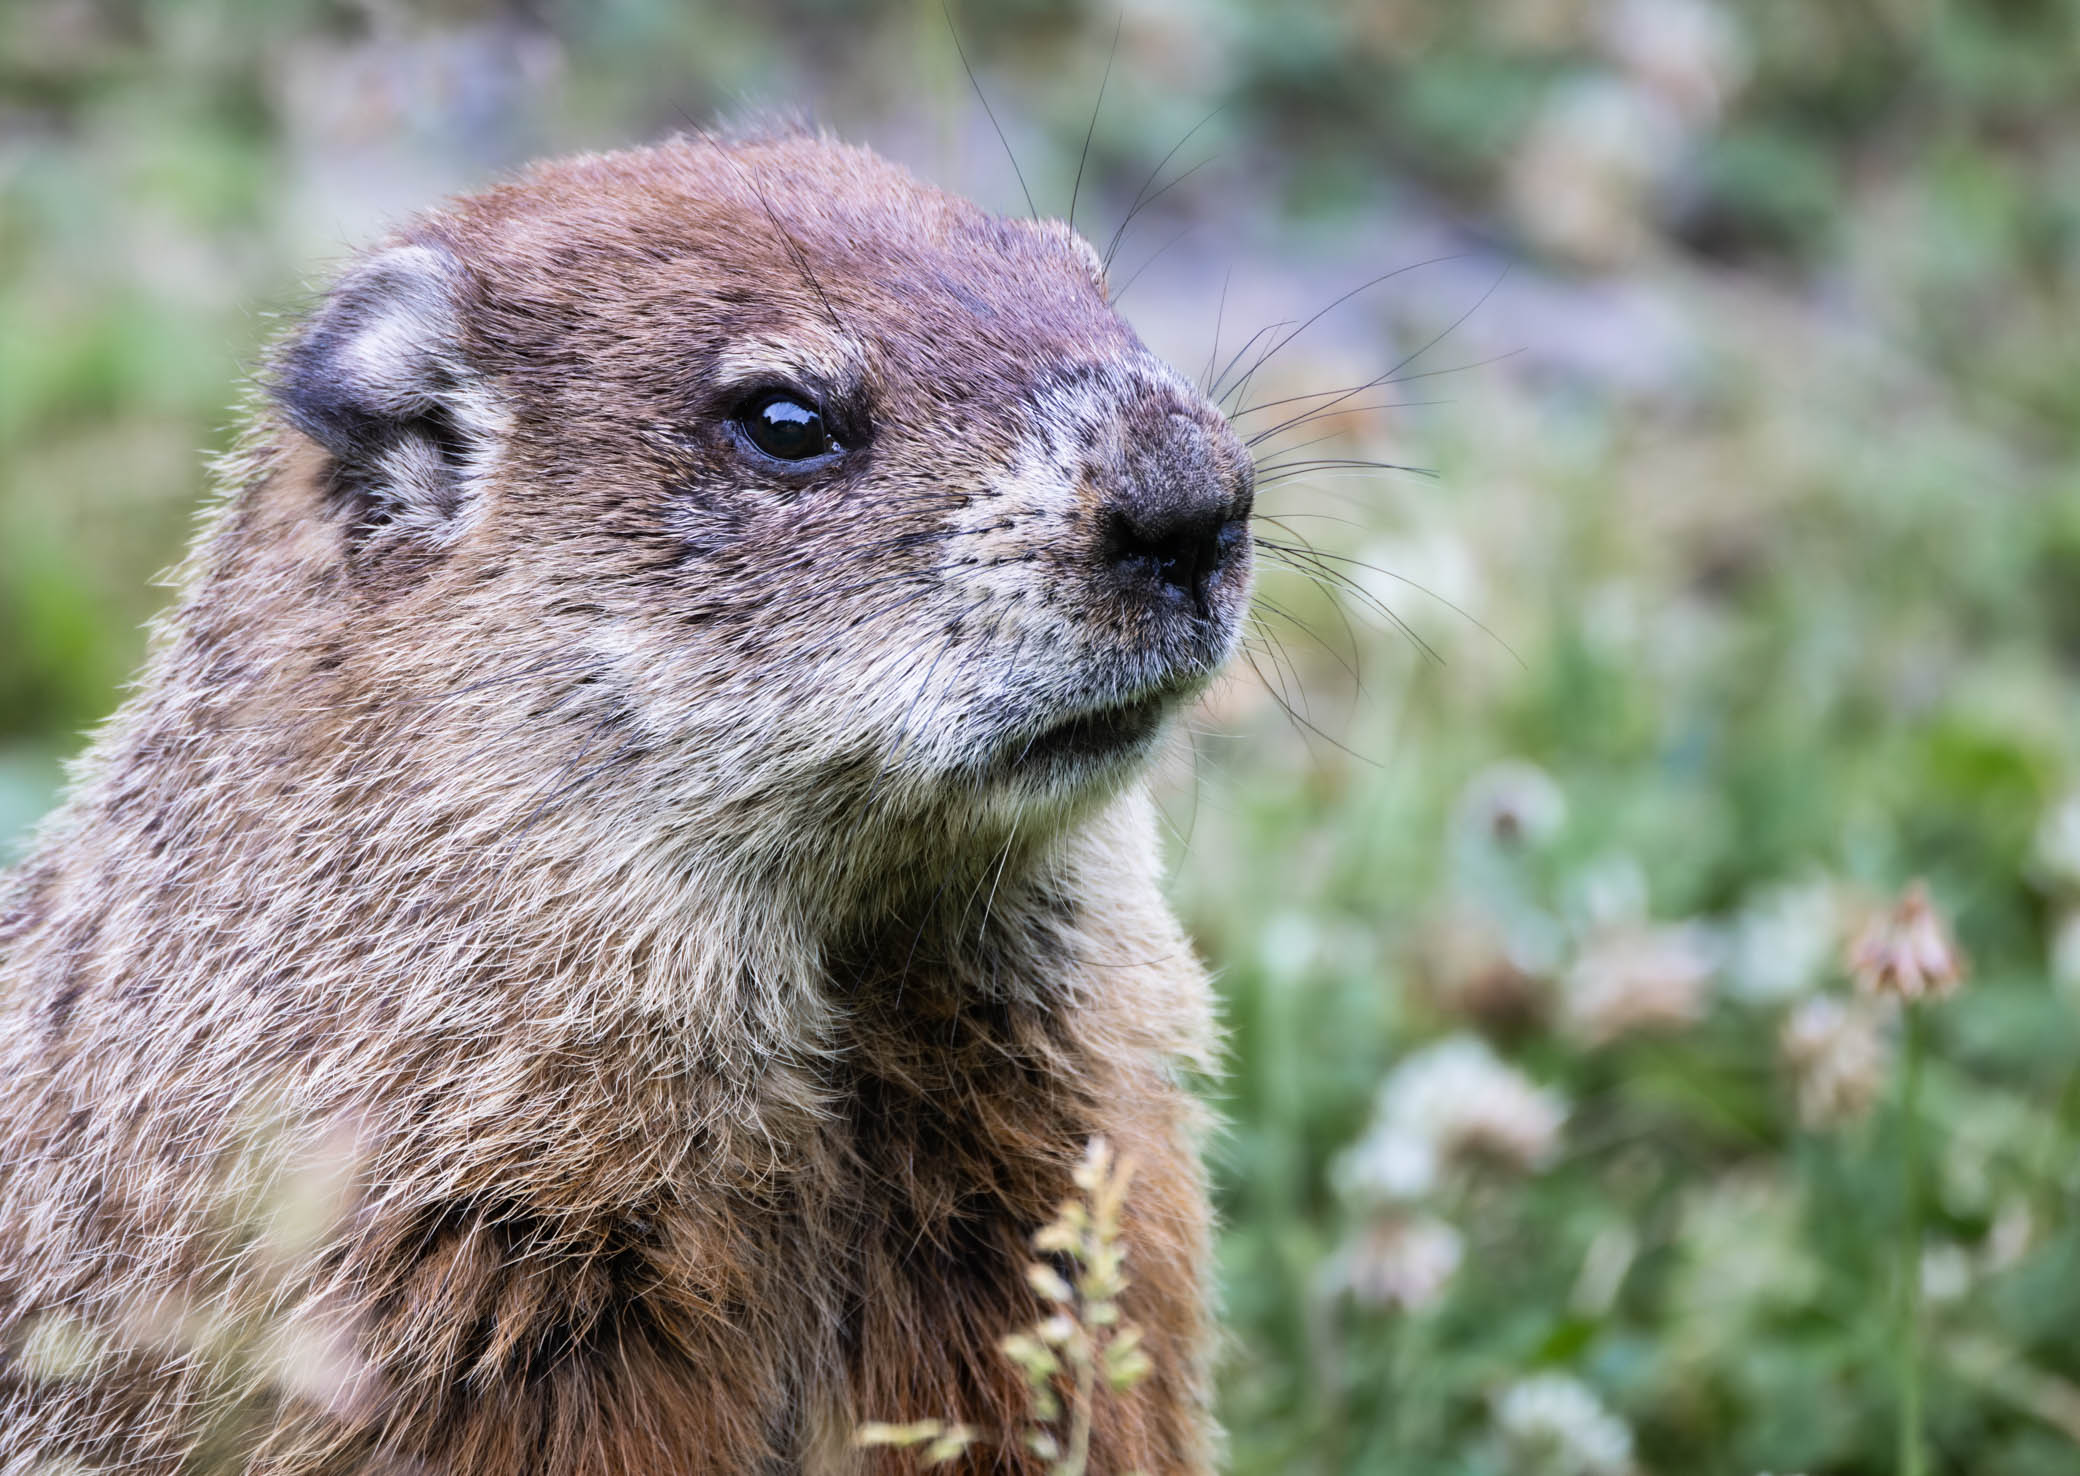 Woodchuck portrait, Red Rock NY, June 16, 2022